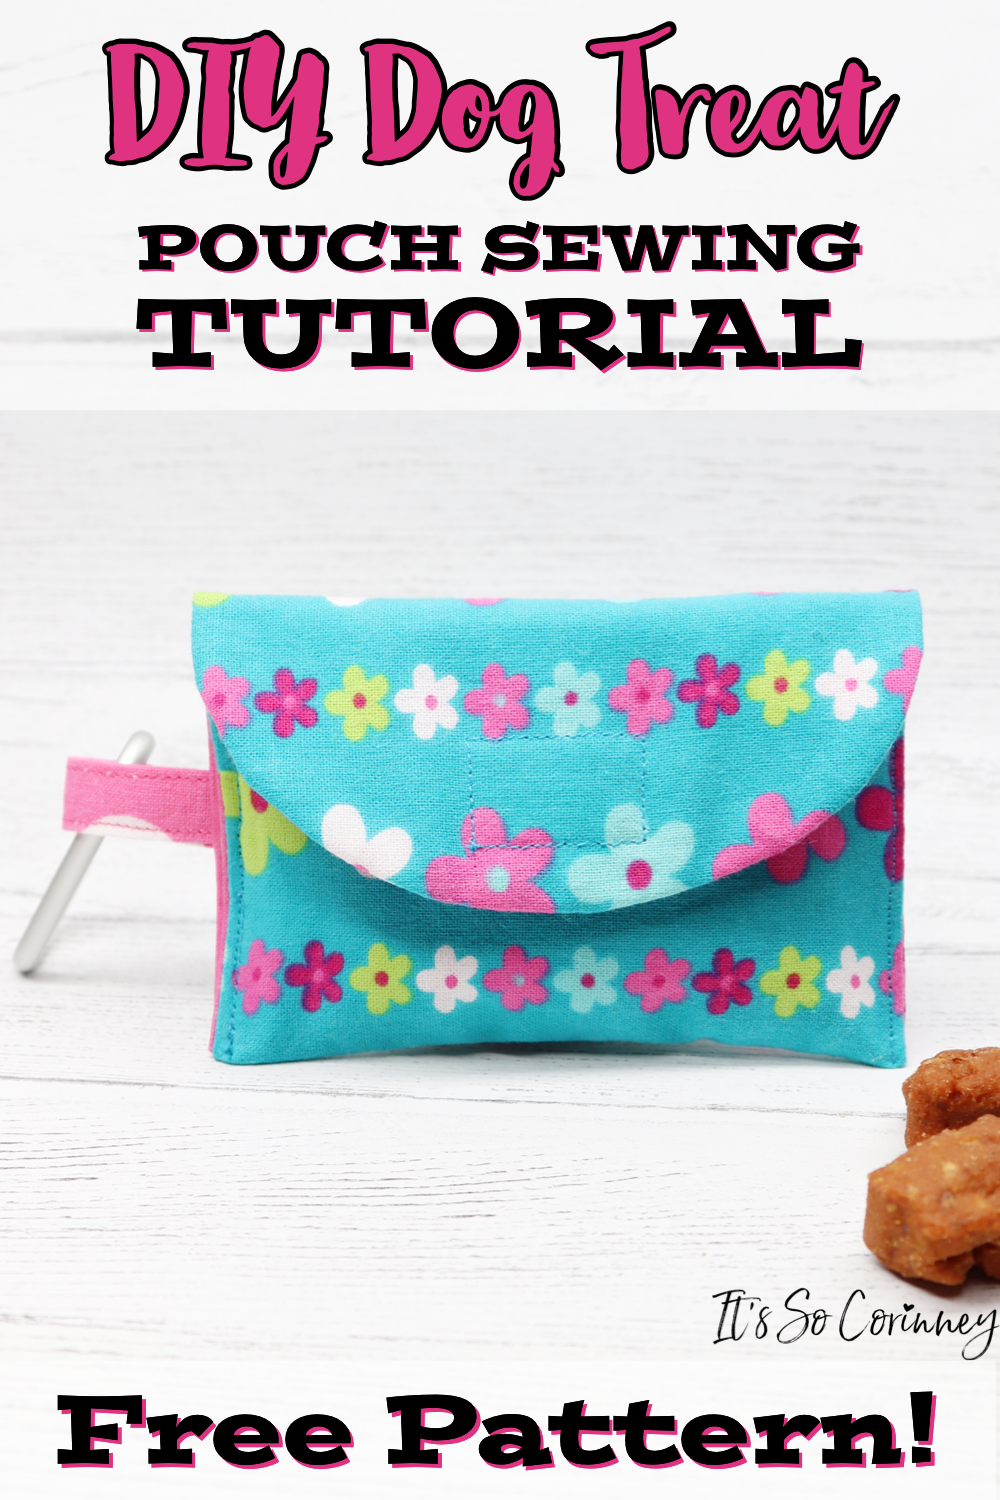 Dog Treat Pouch Sewing Tutorial